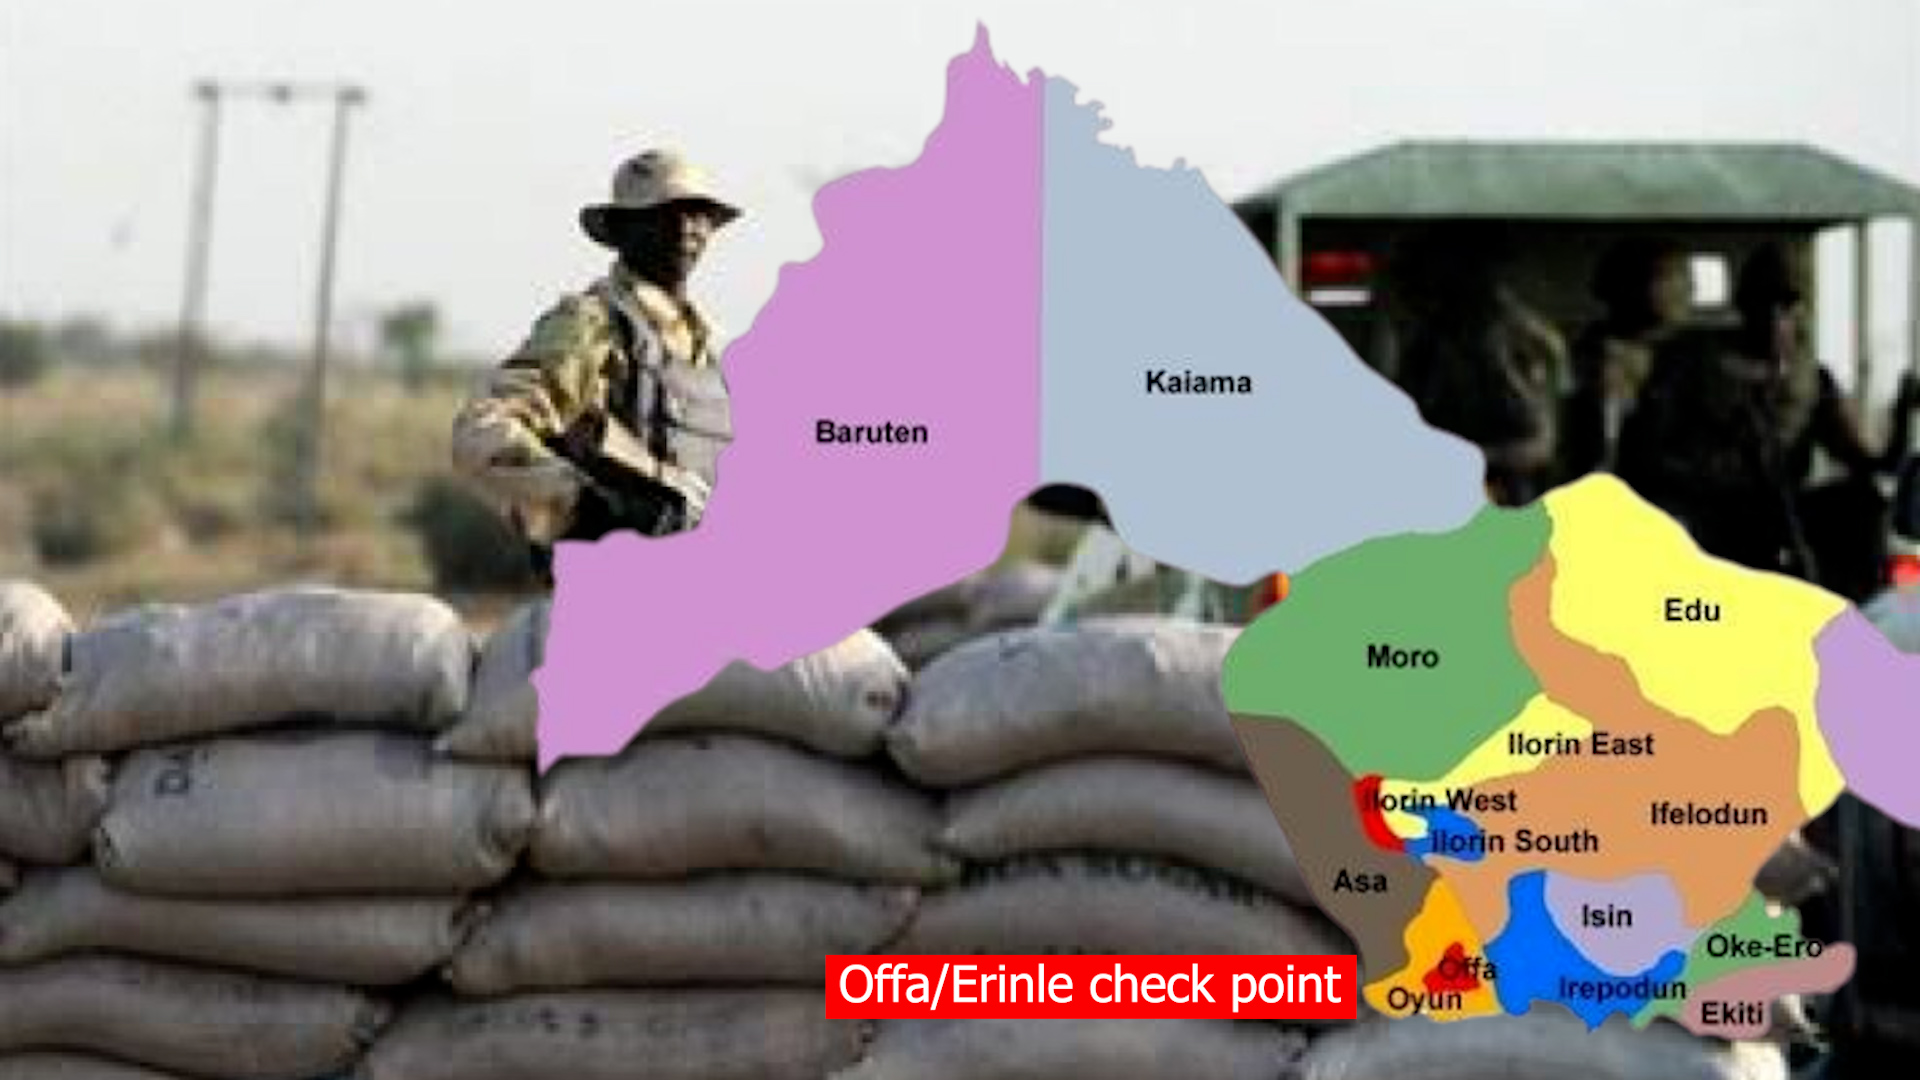 Offa/Erinle check point: motorist alleged Soldiers of extortion